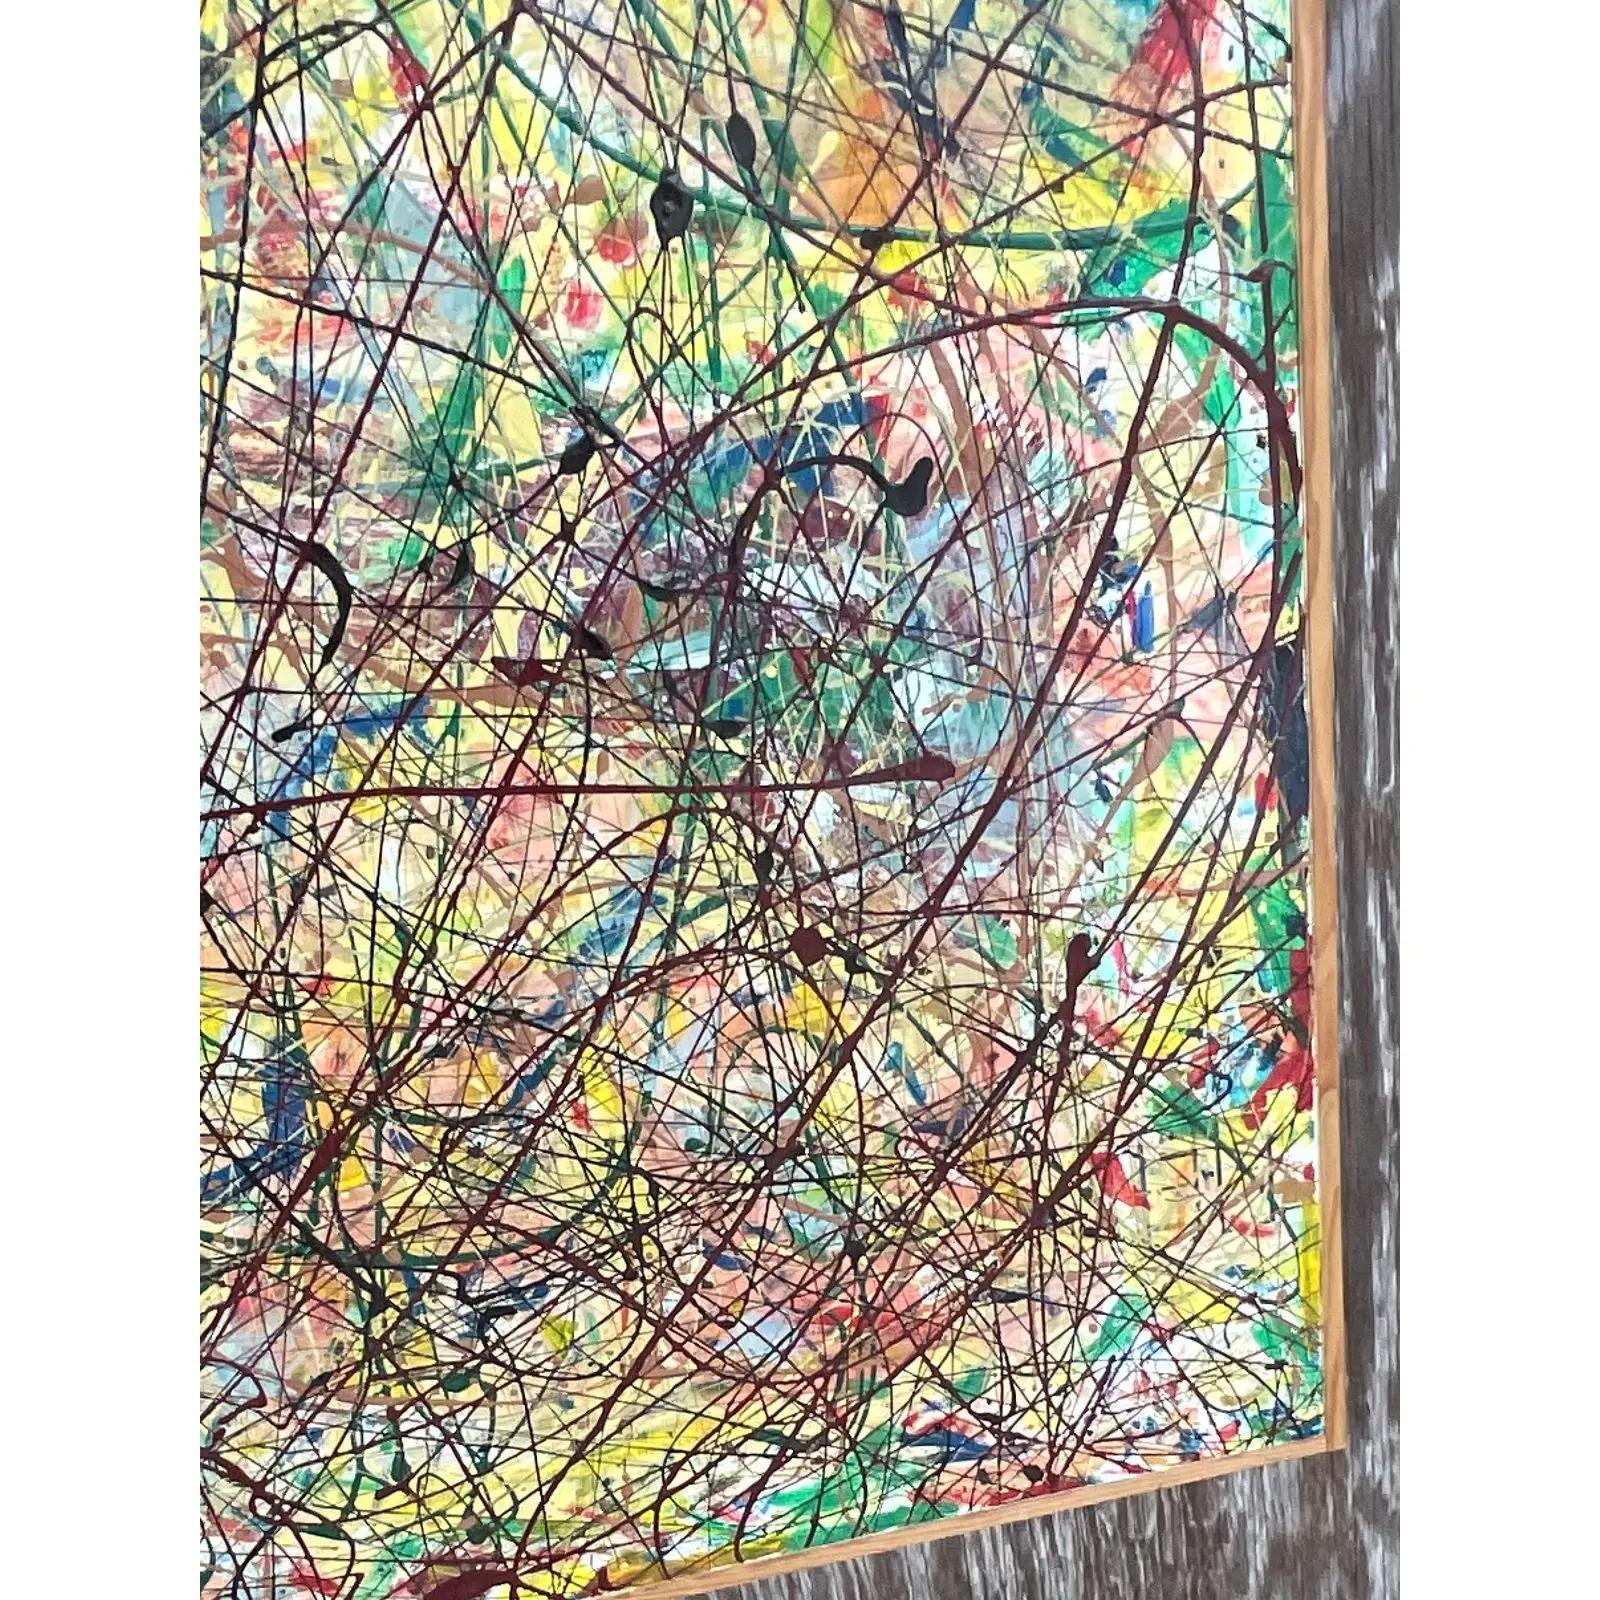 Gorgeous vintage original abstract painting. Brilliant colors dominate this composition of high energy paint splatters. Signed by the artist Lincoln Park. Acquired from a Palm Beach estate.